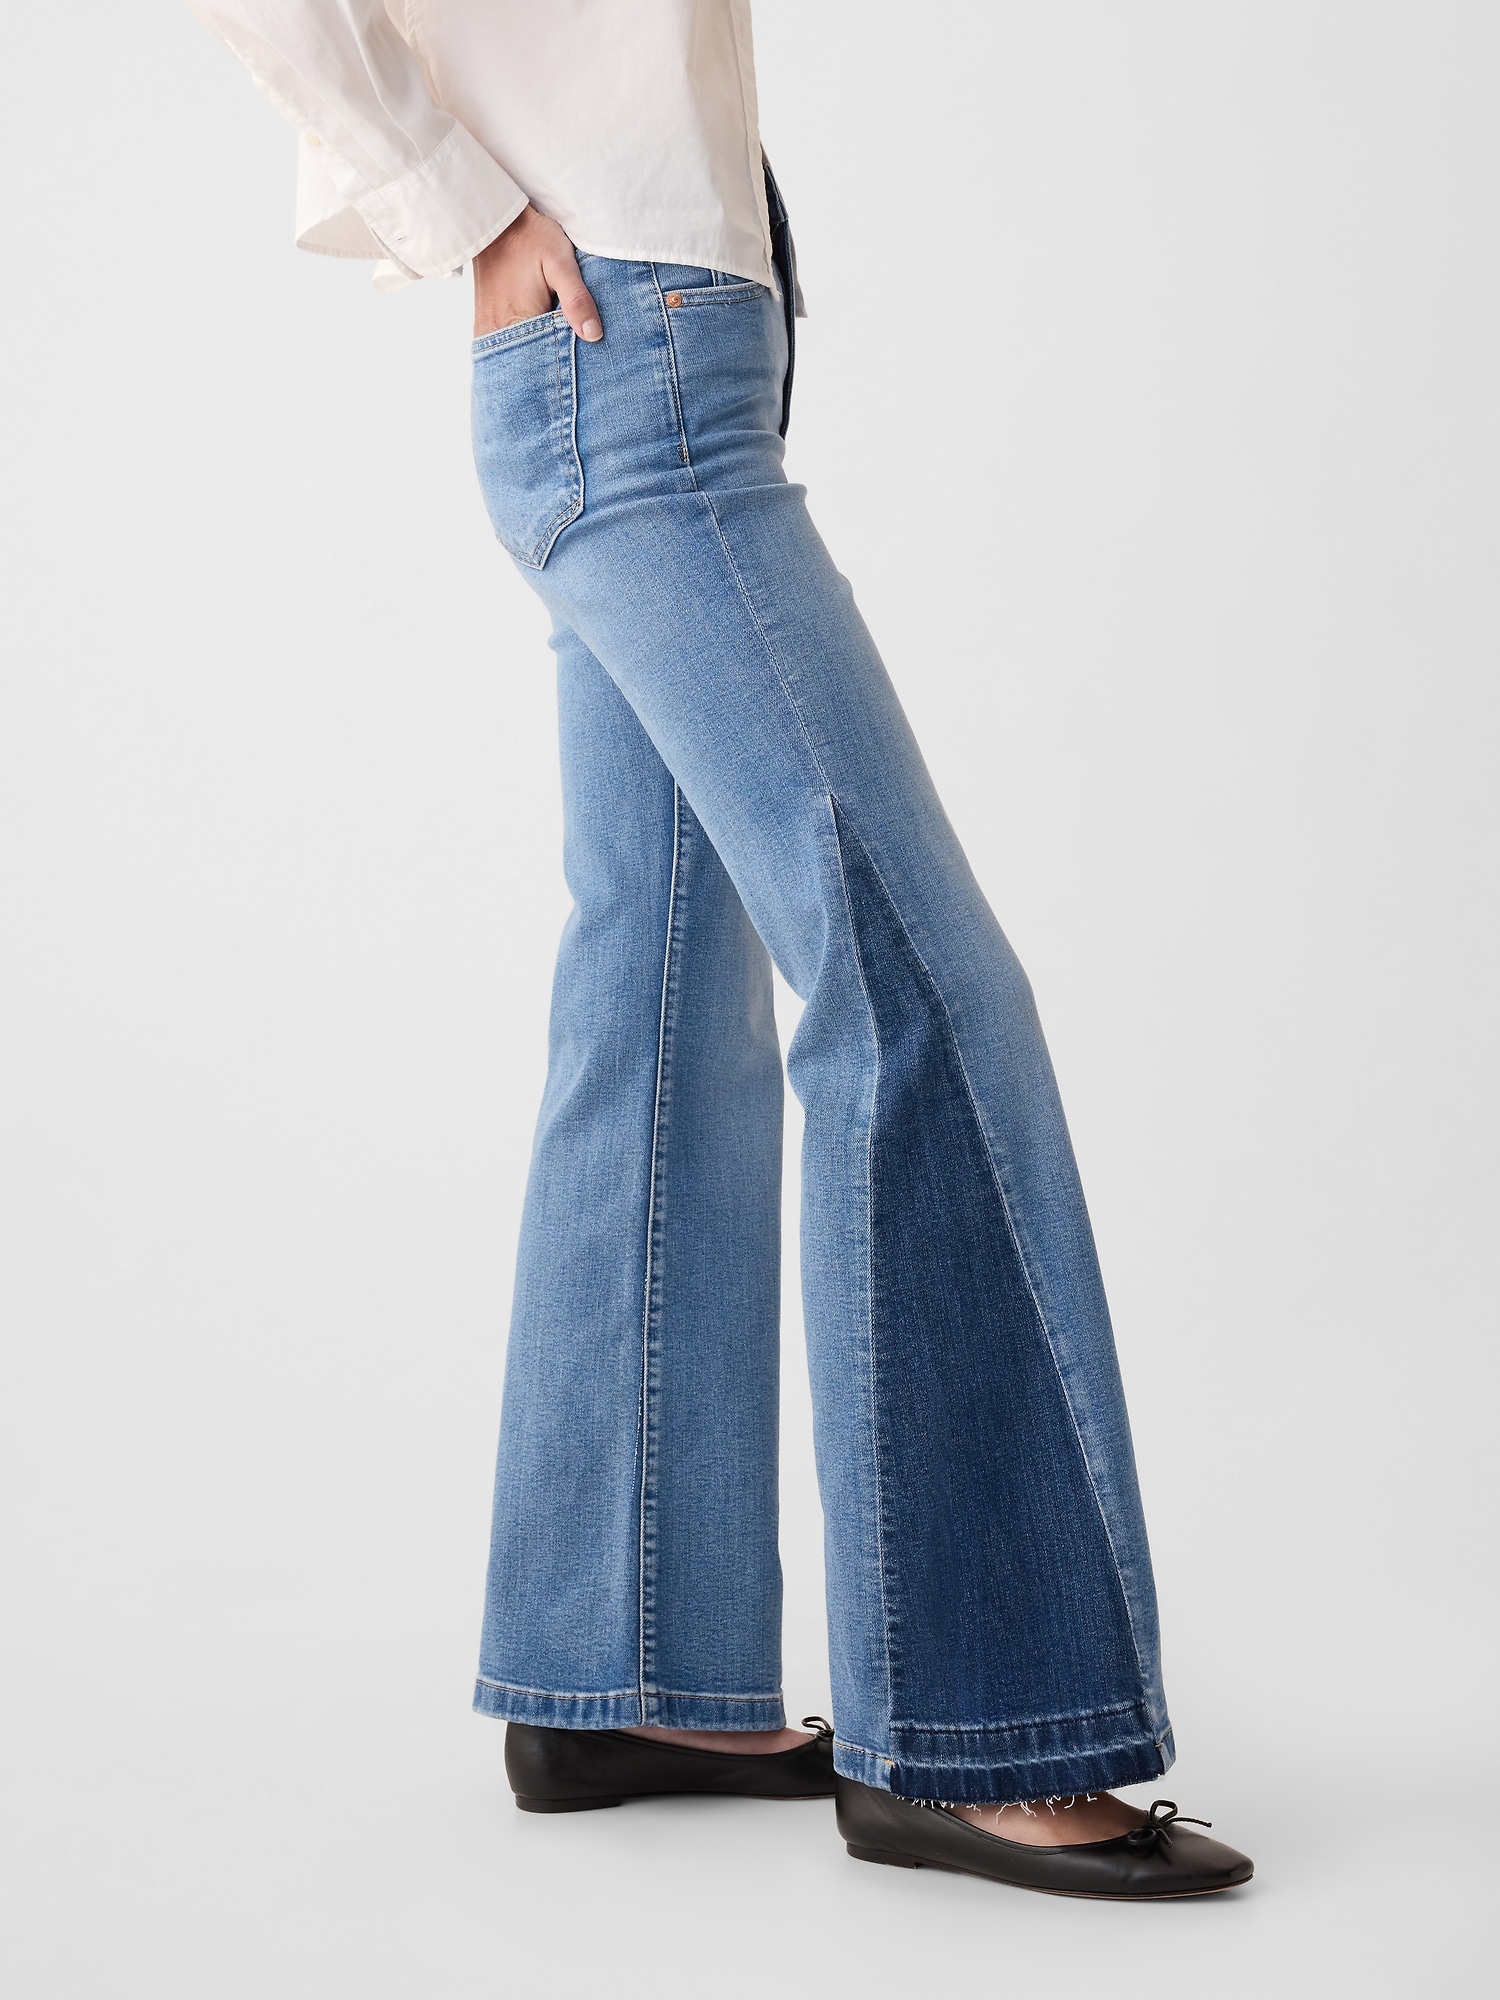 Buy Gap 70's Flare Jeans from the Gap online shop